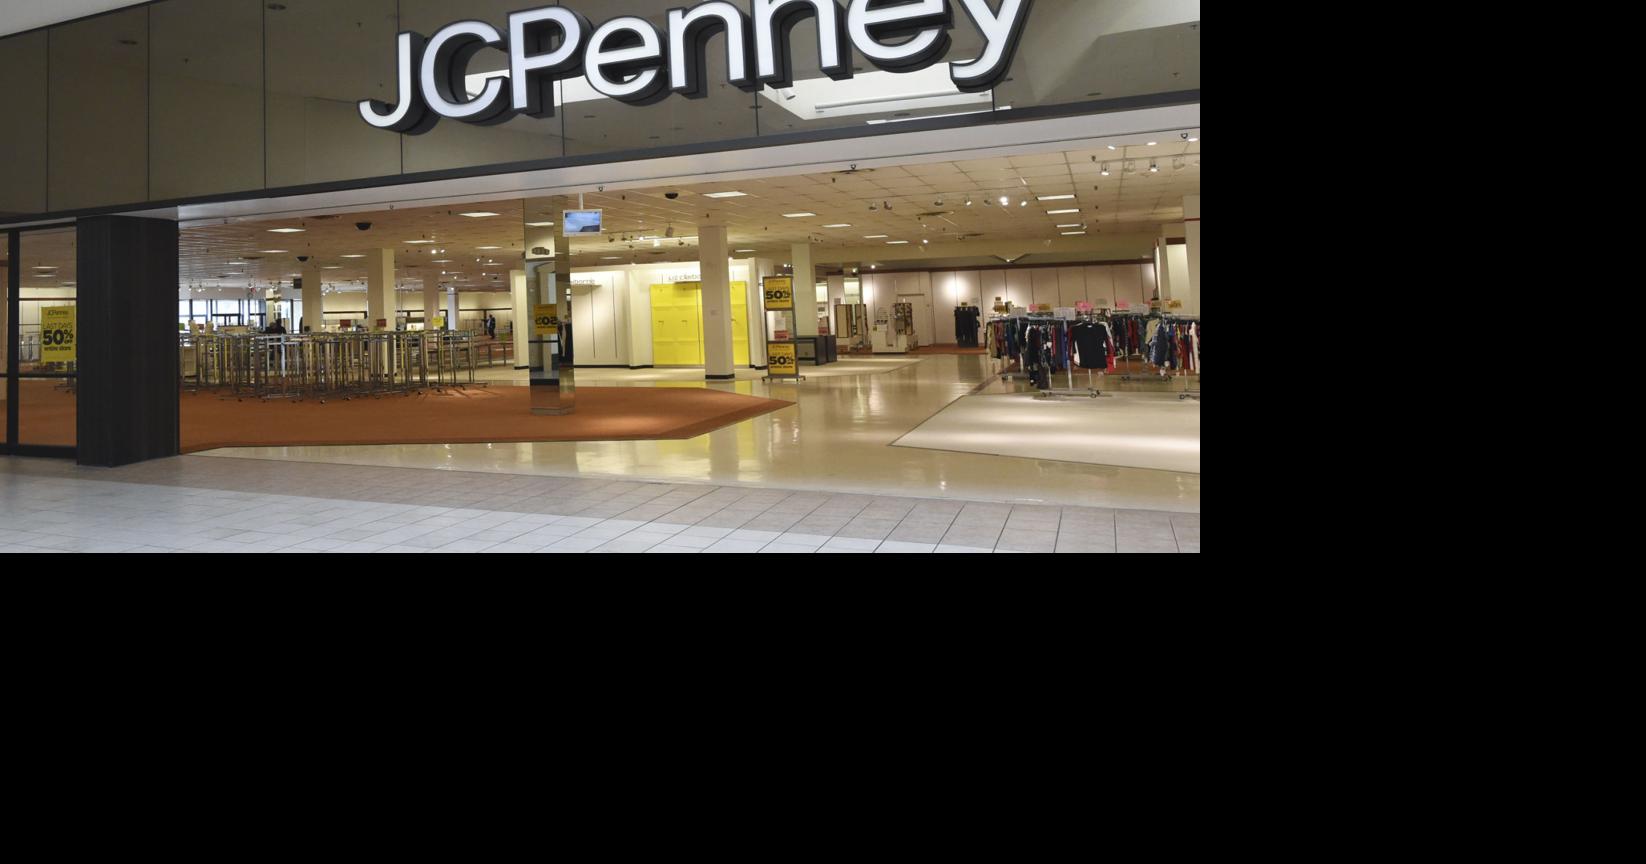 At least two new stores coming to mall's former J.C. Penney space